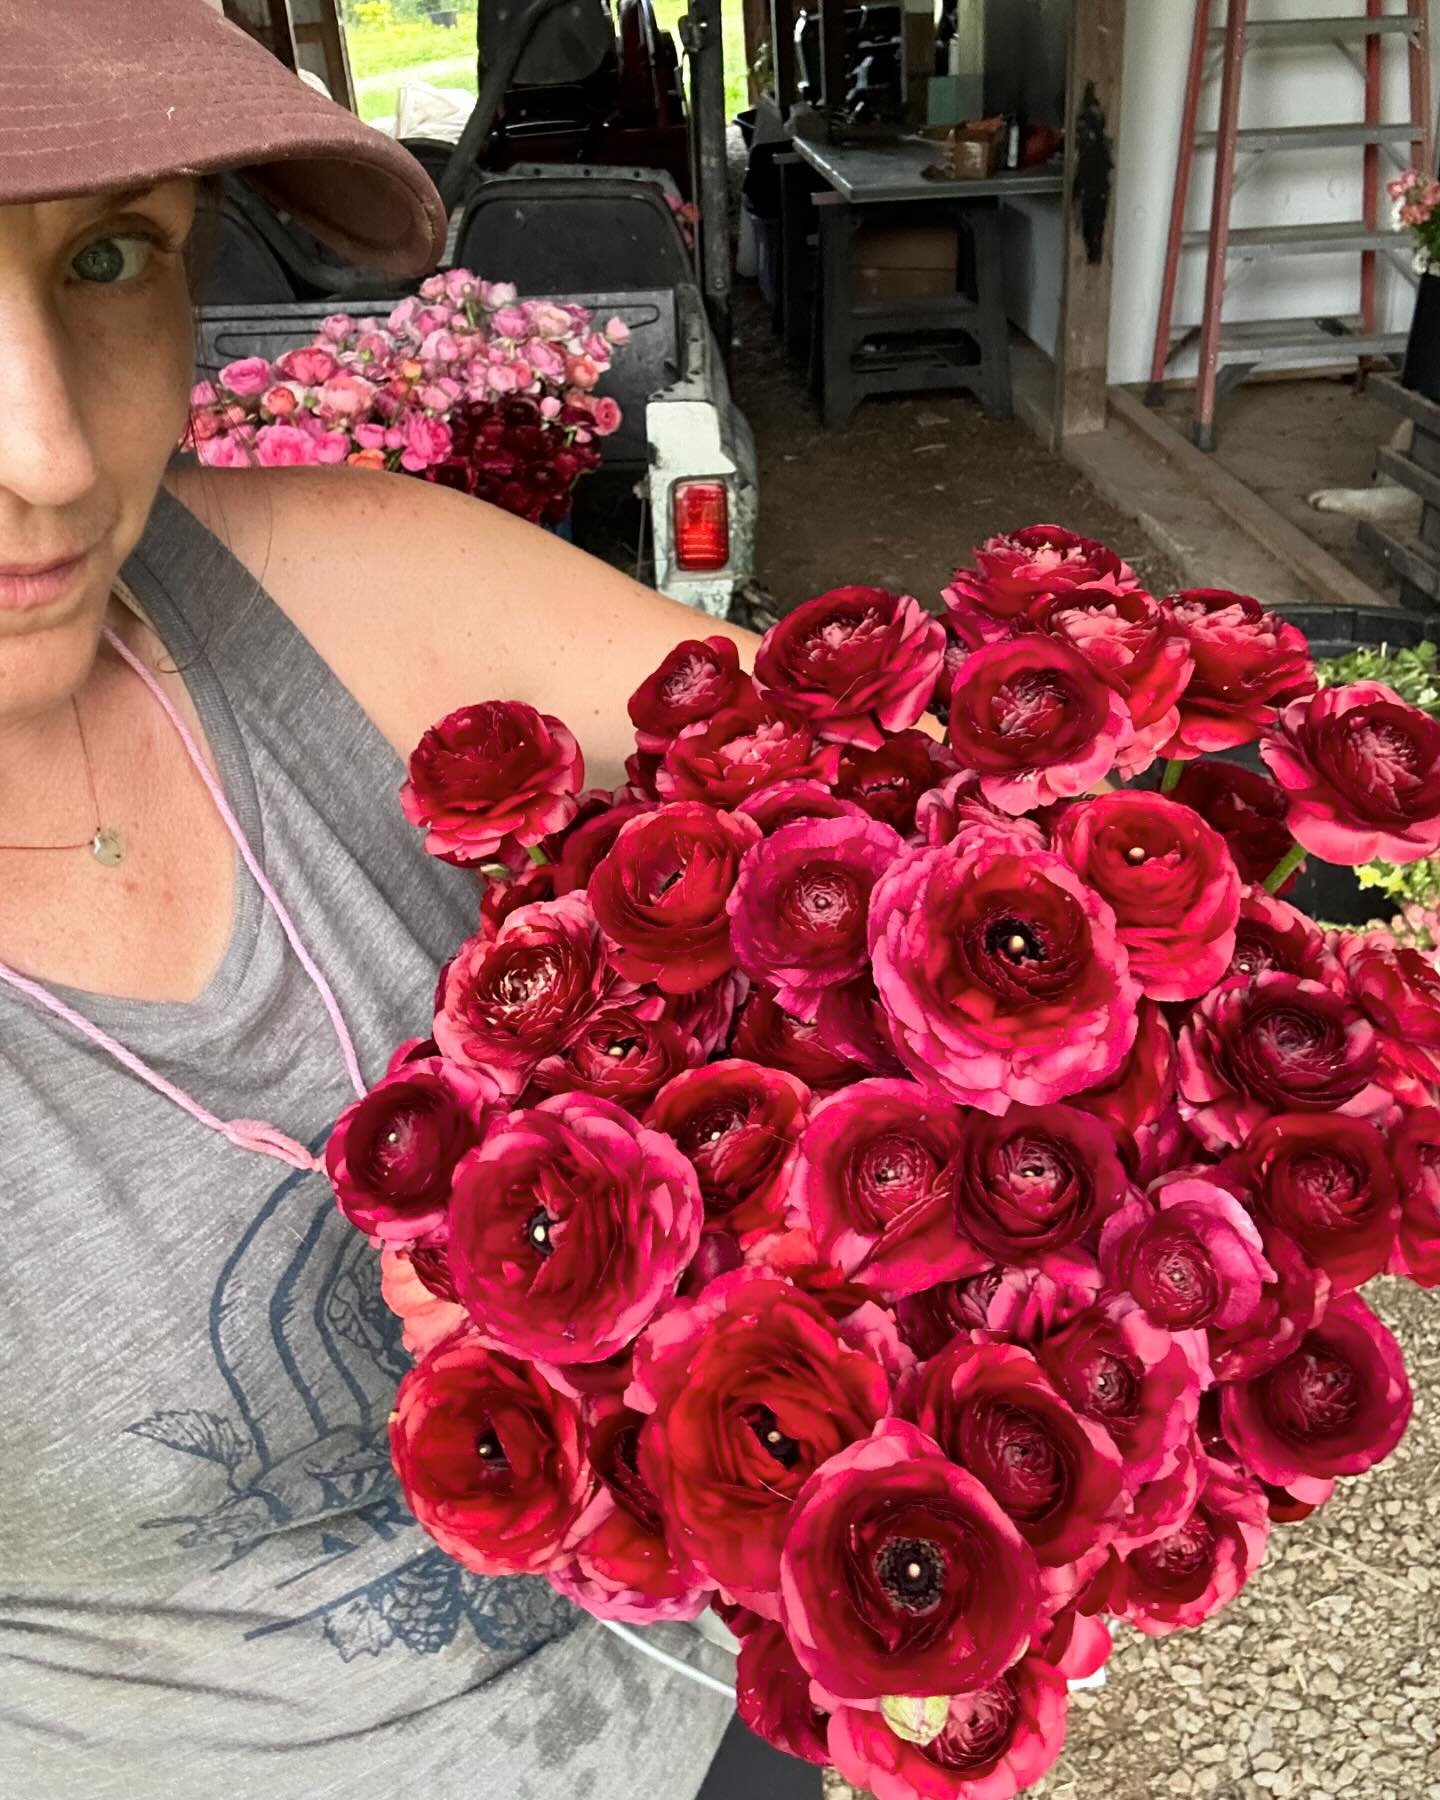 It&rsquo;s go time, friends! Deluxe Mother&rsquo;s Day bouquets are listed for preorder on our website for farmers market pick-up only. Additional premade bouquets and custom options will be available in person  but only til the people sell us out. S